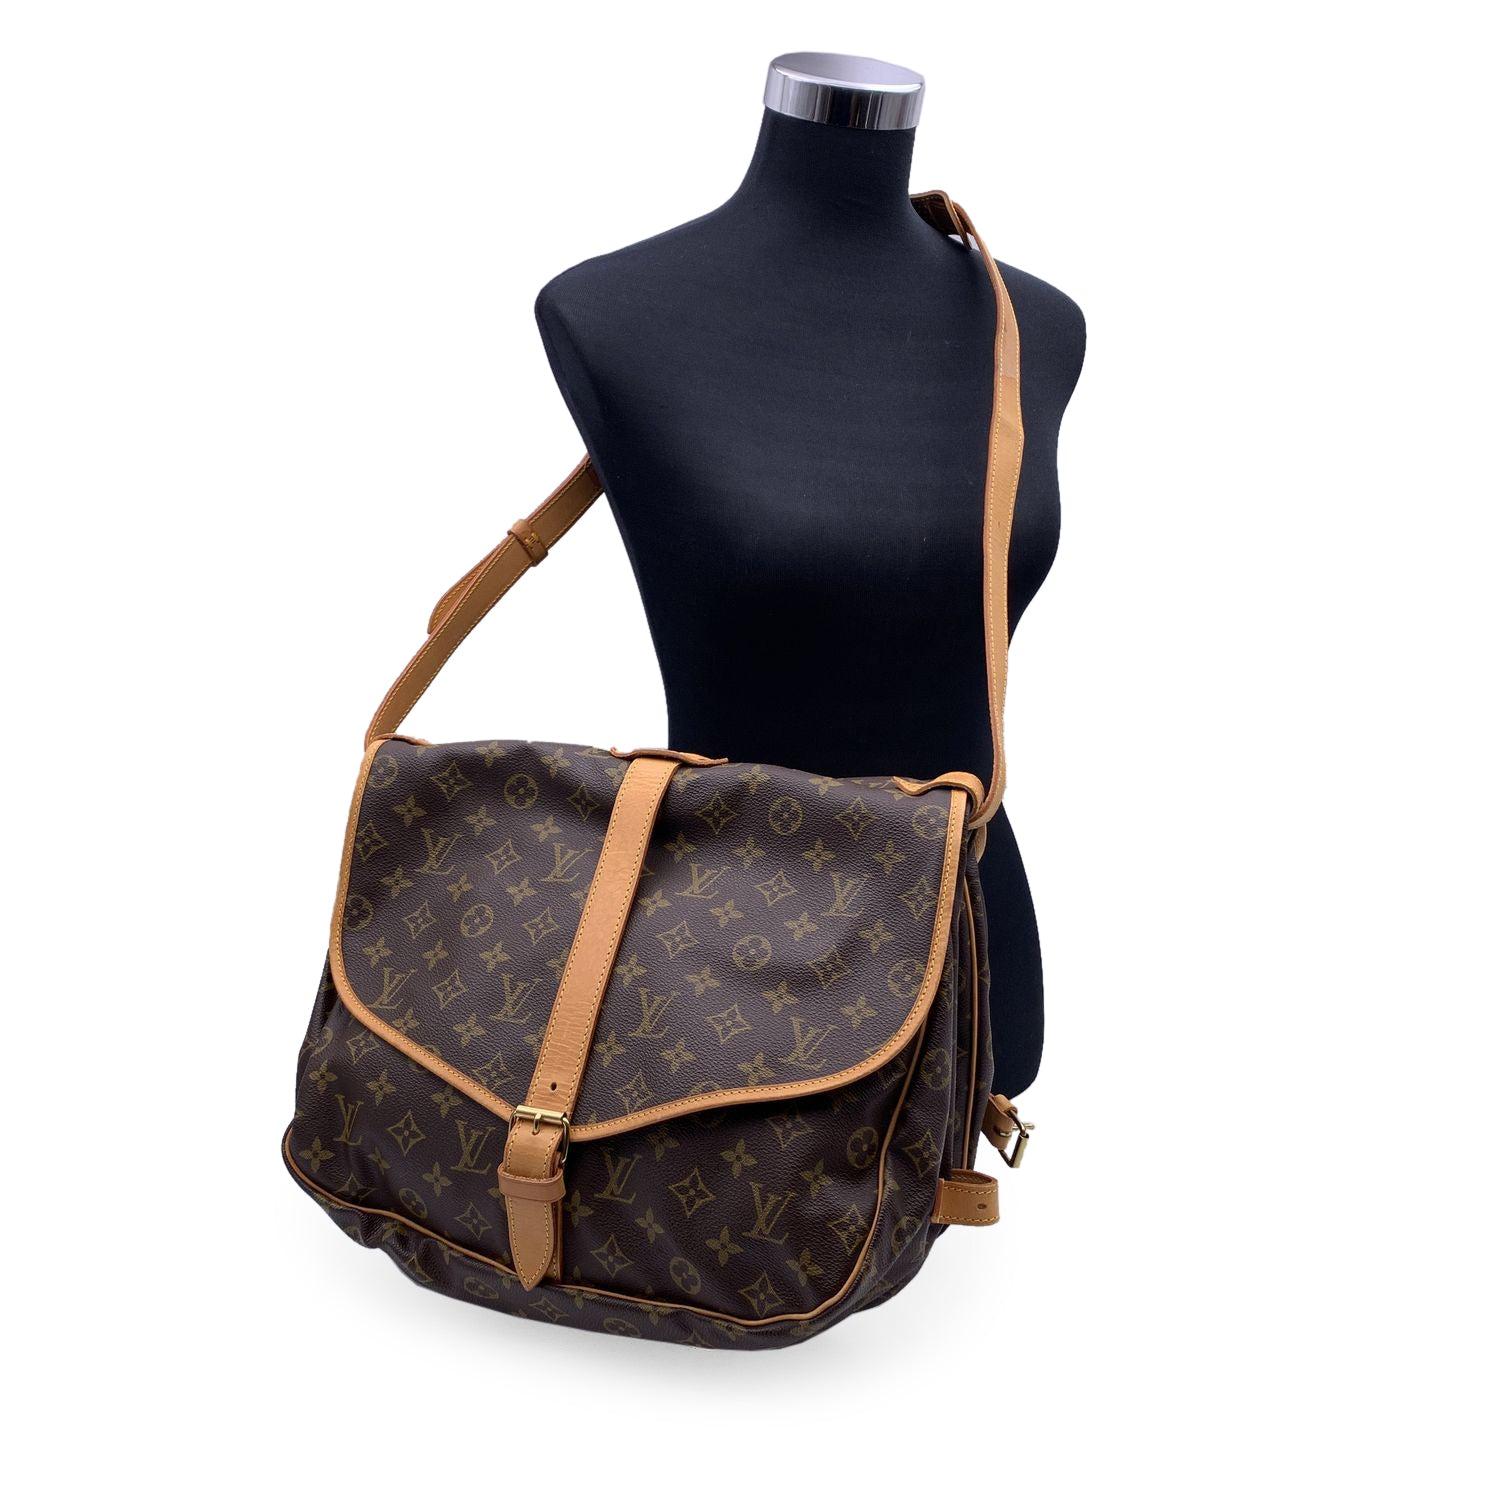 LOUIS VUITTON 'Saumur 35' inspired by equestrian 'SADDLE' bag. The legendary SAUMUR features dual front compartments, held tightly together at the sides with belt-like tabs. Adjustable long shoulder strap with pad for added comfort. 'LOUIS VUITTON